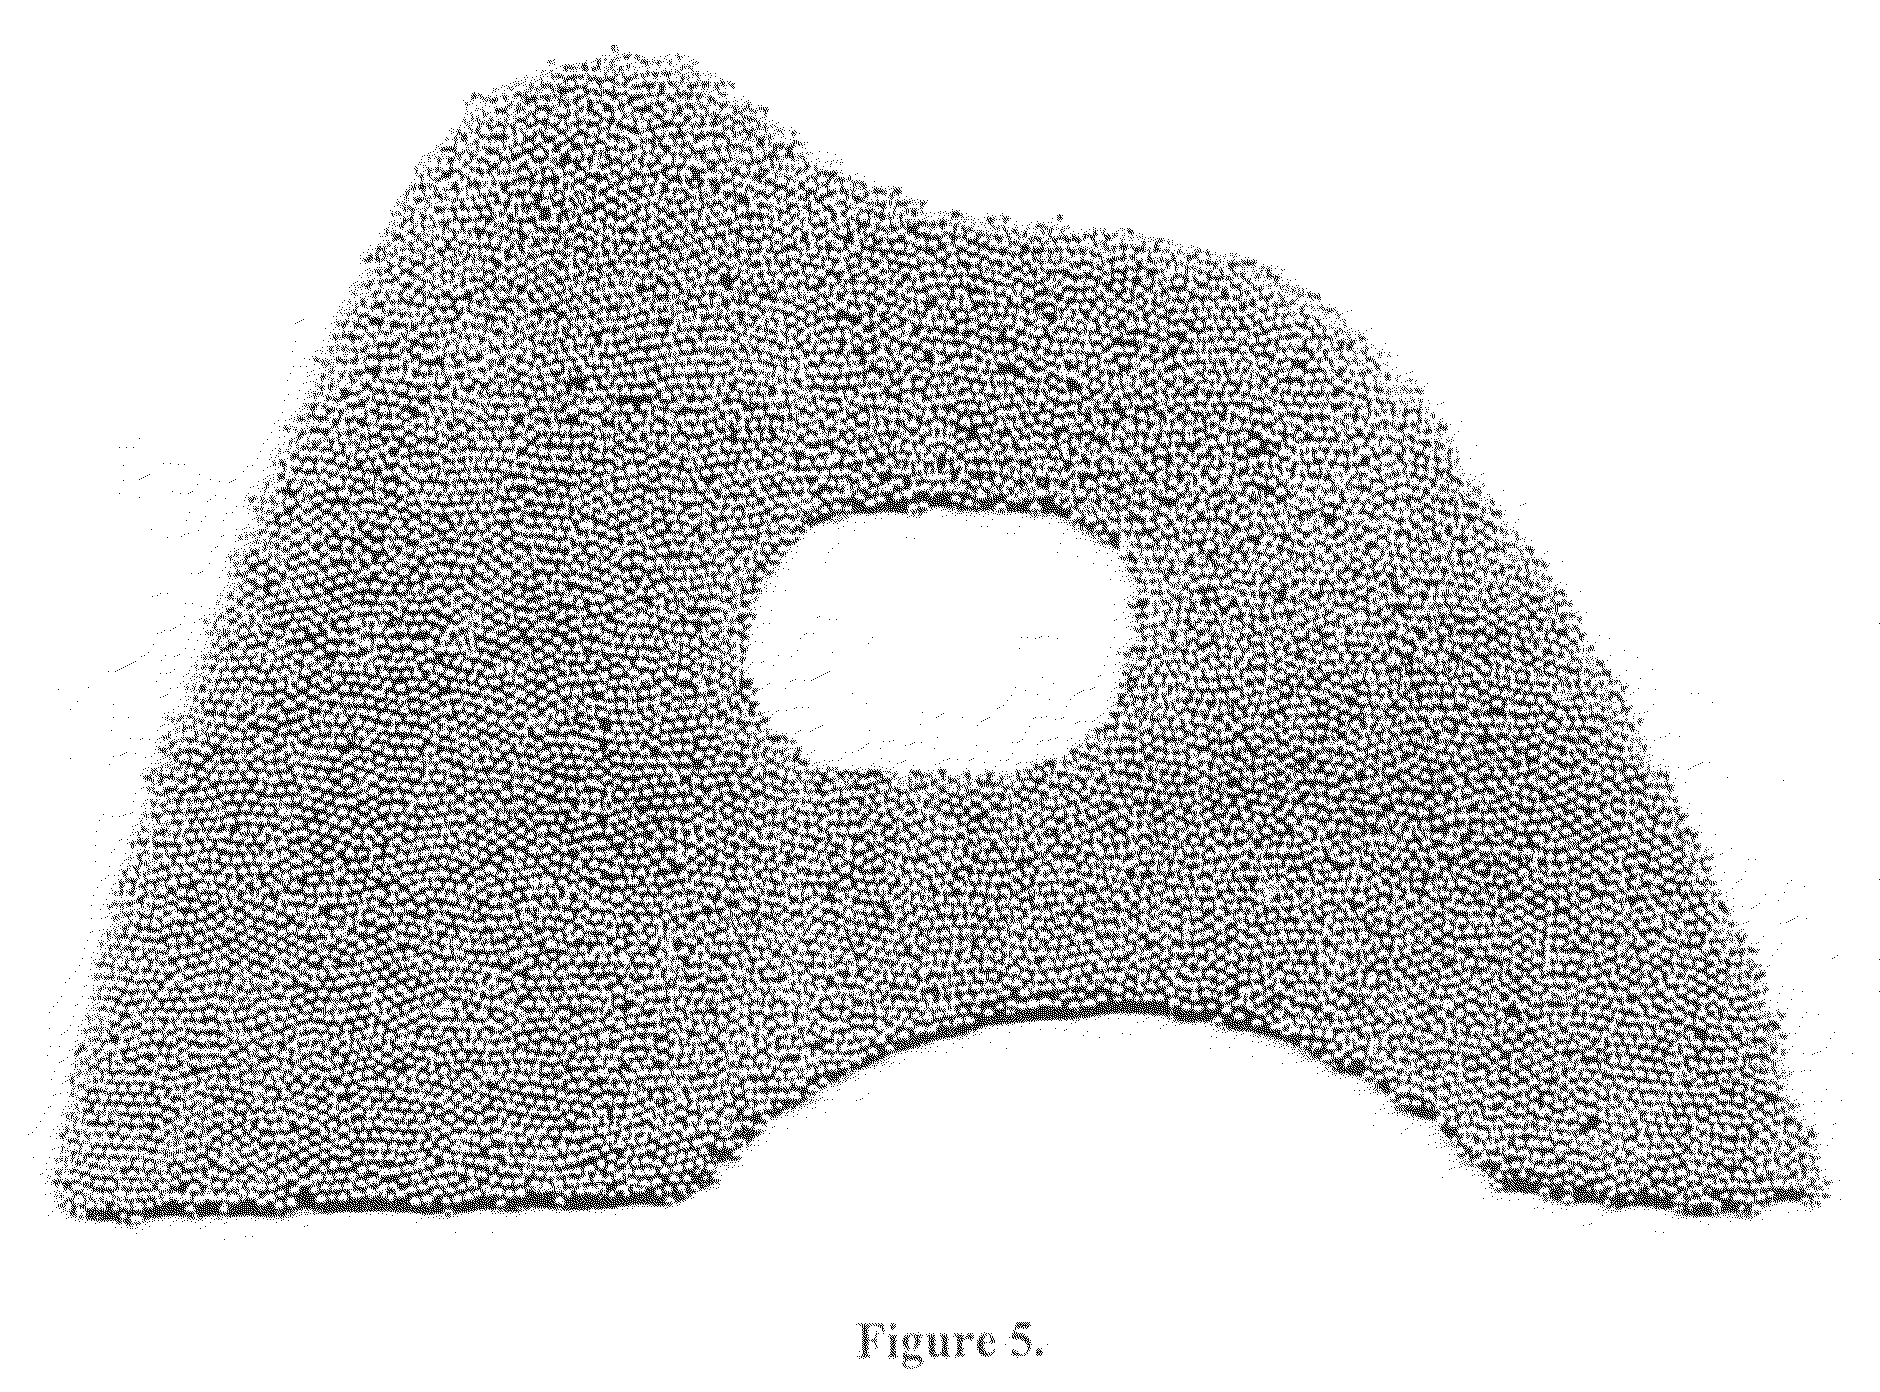 Microstructure applique and method for making same